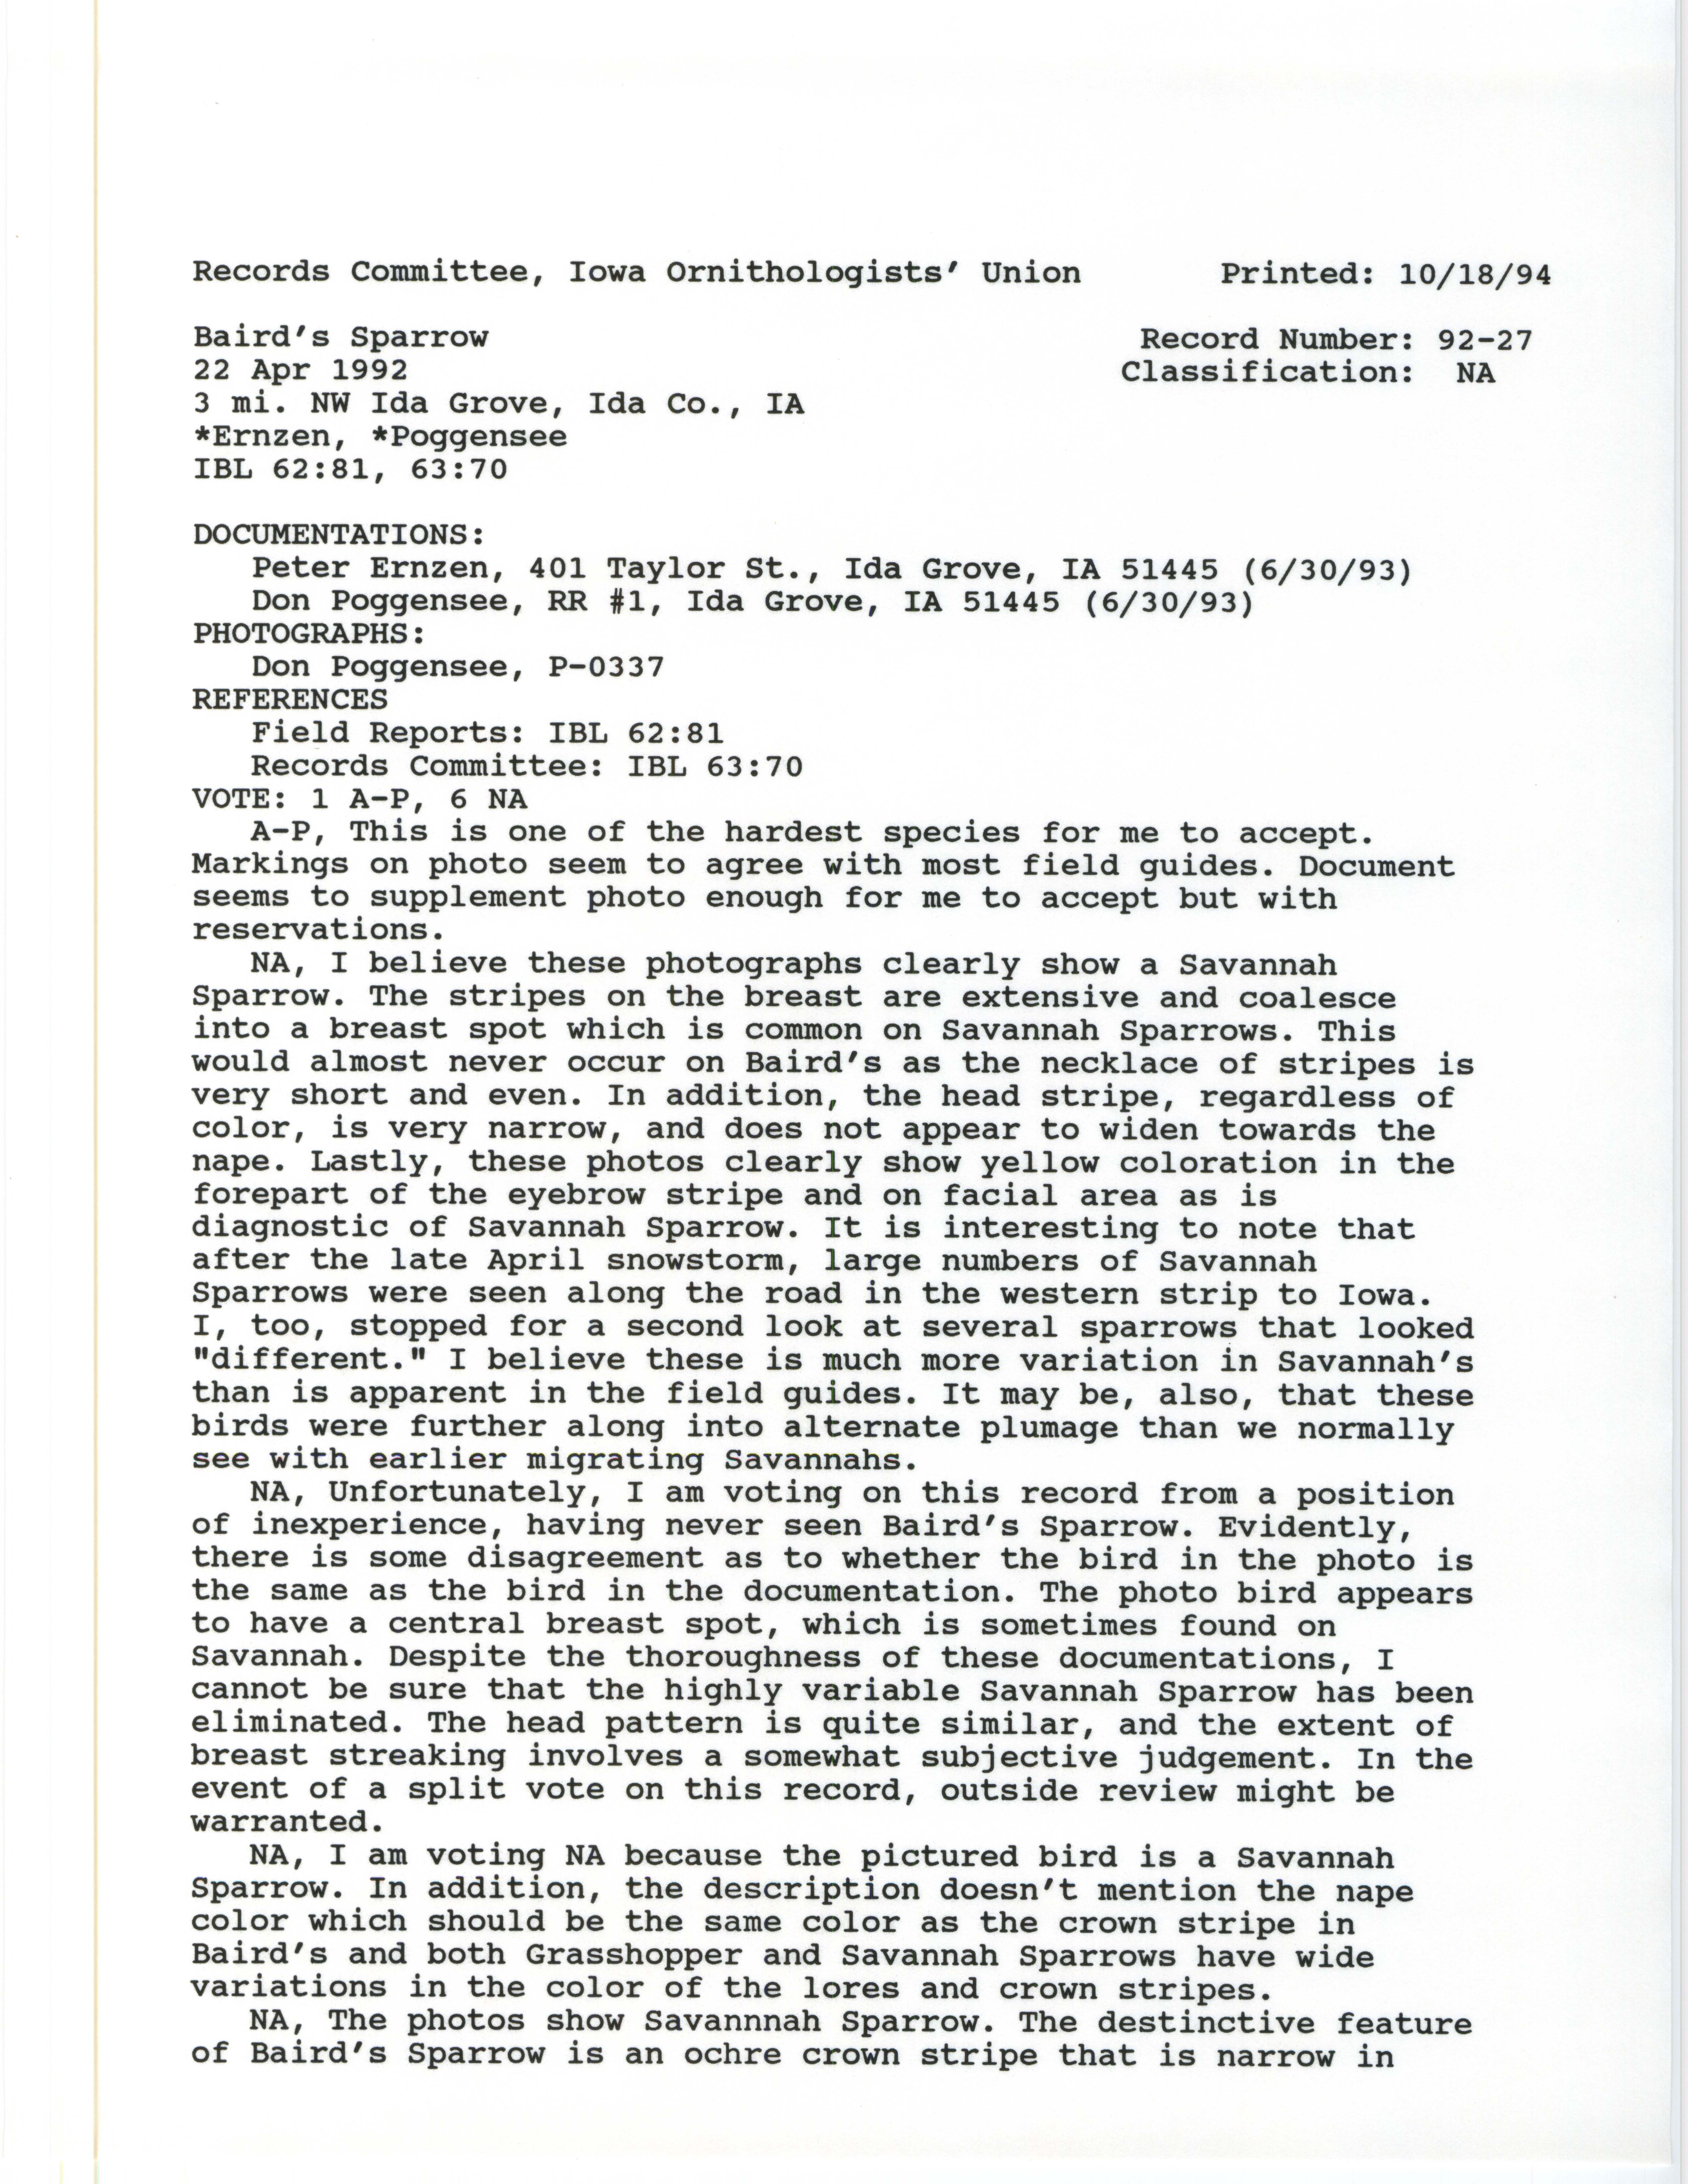 Records Committee review for rare bird sighting for Baird's Sparrow northwest of Ida Grove, 1992